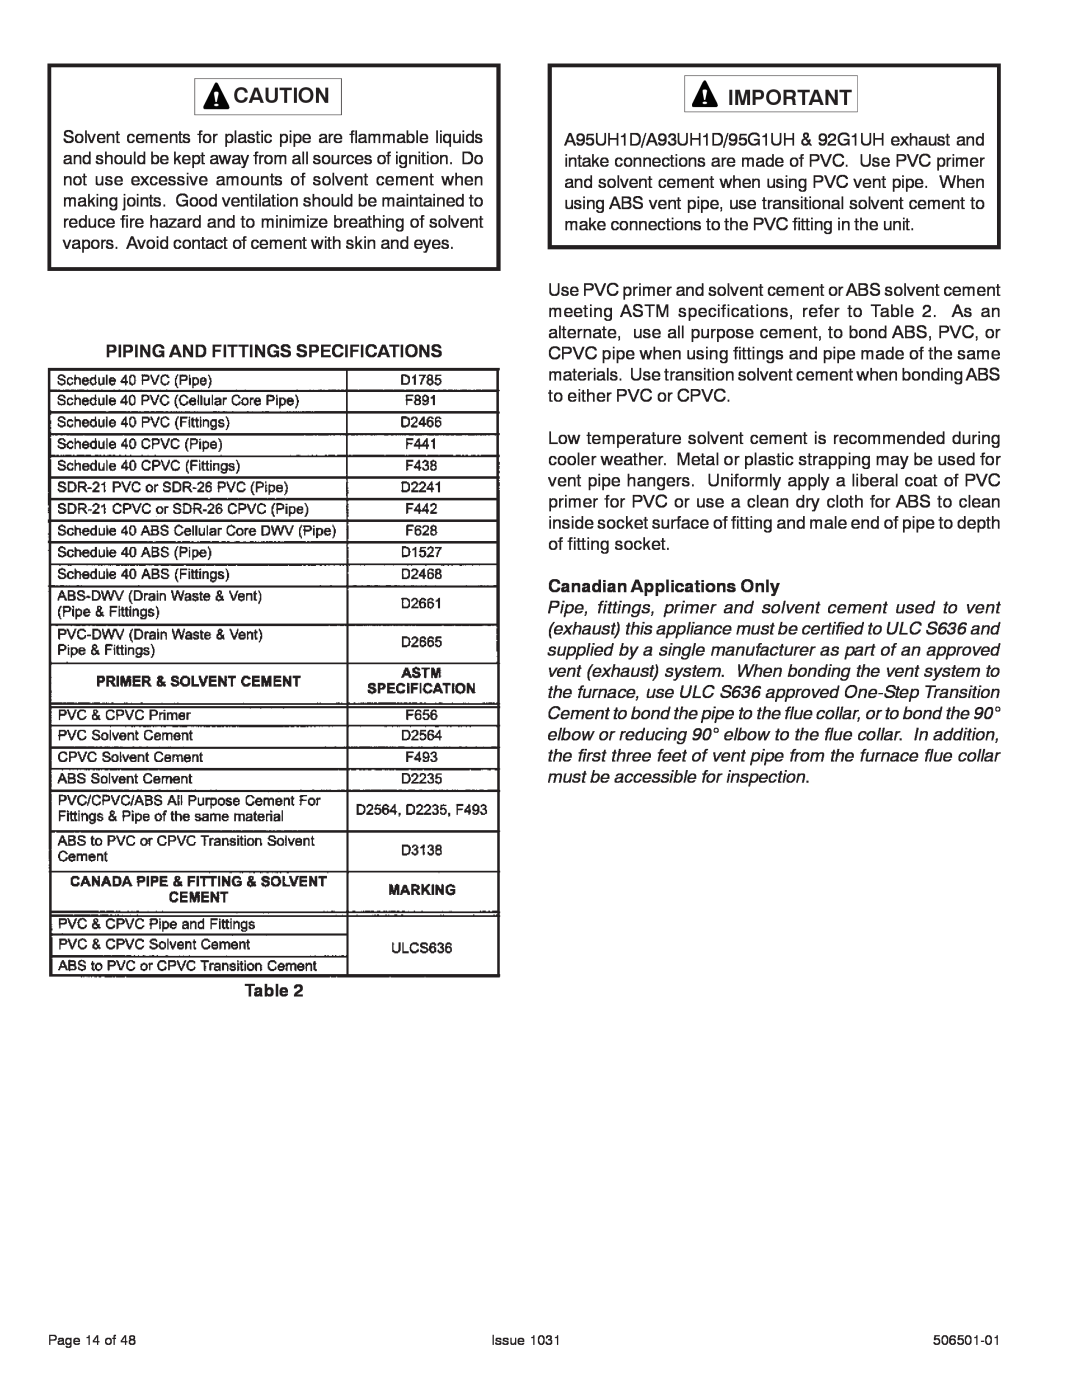 Allied Air Enterprises A93UH PIPING AND FITTINGS SPECIFICATIONS Table, Canadian Applications Only, Page 14 of, Issue 